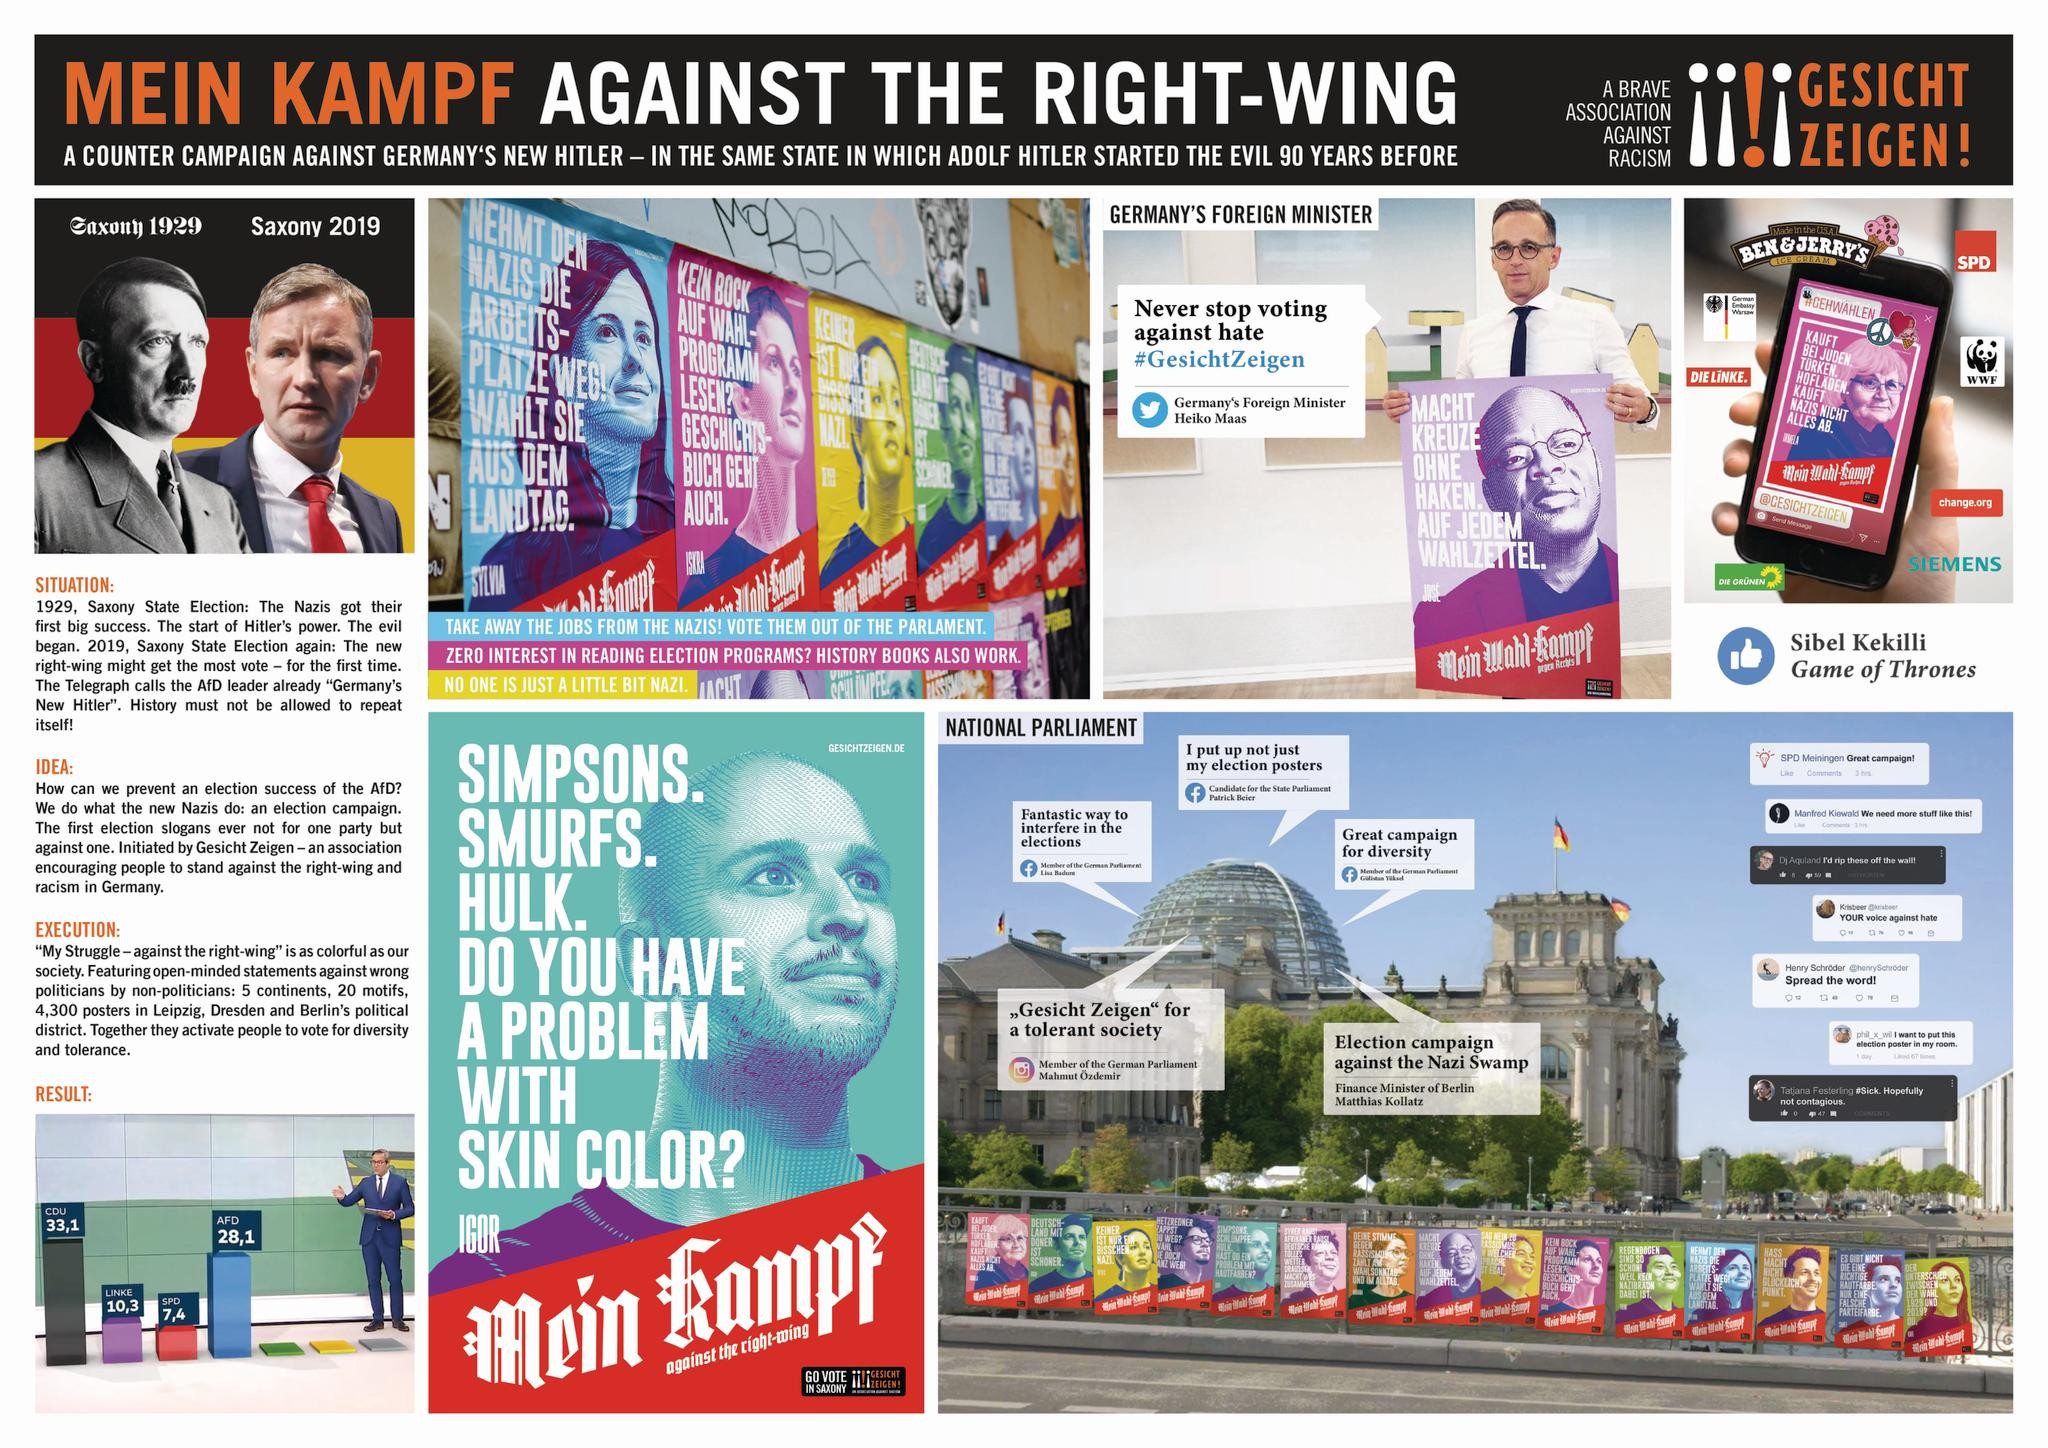 MEIN KAMPF – AGAINST THE RIGHT-WING in the German elections